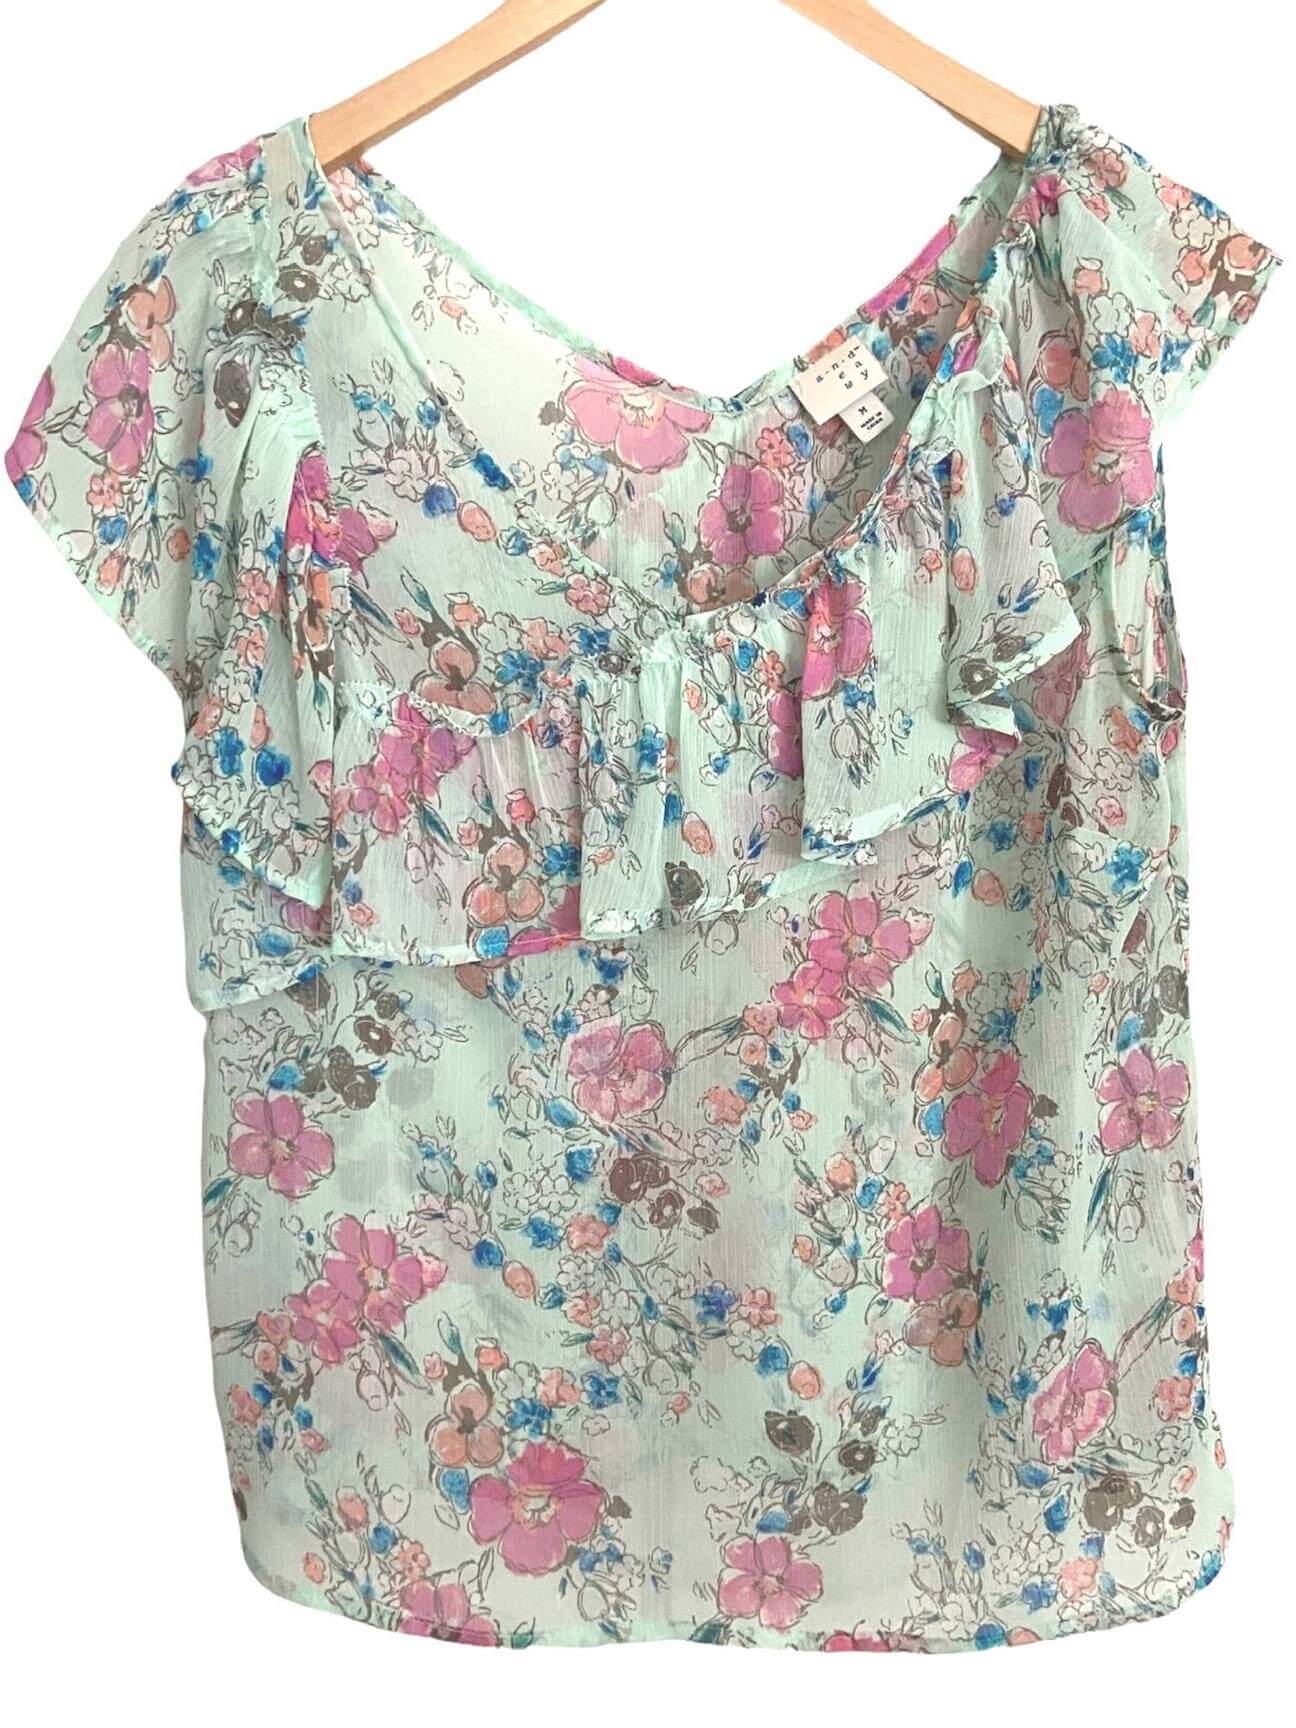 Soft Summer A NEW DAY floral print blouse 